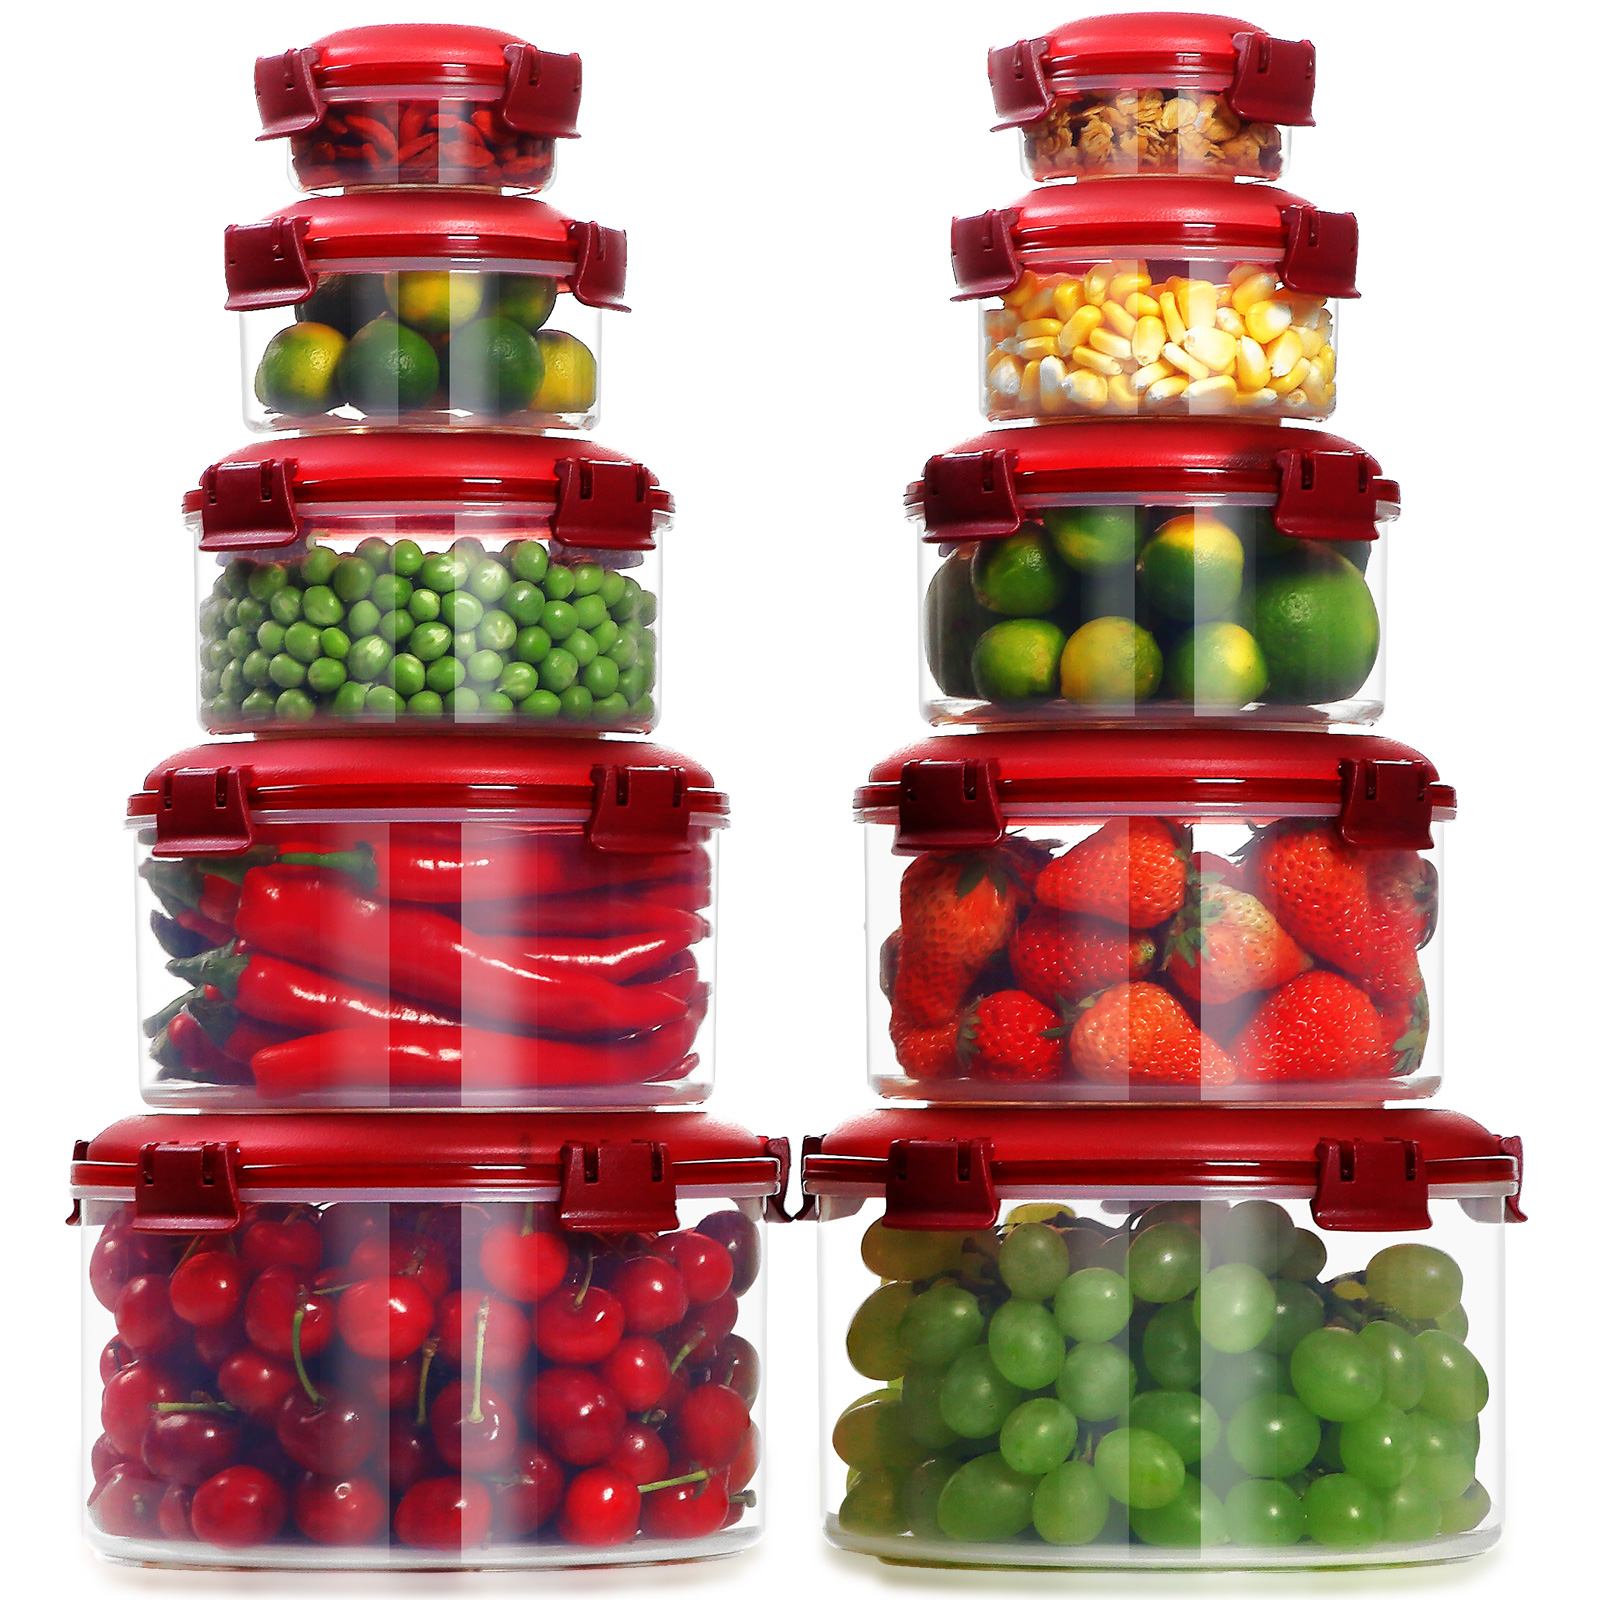 10 pieces Set of Round Food Containers Set